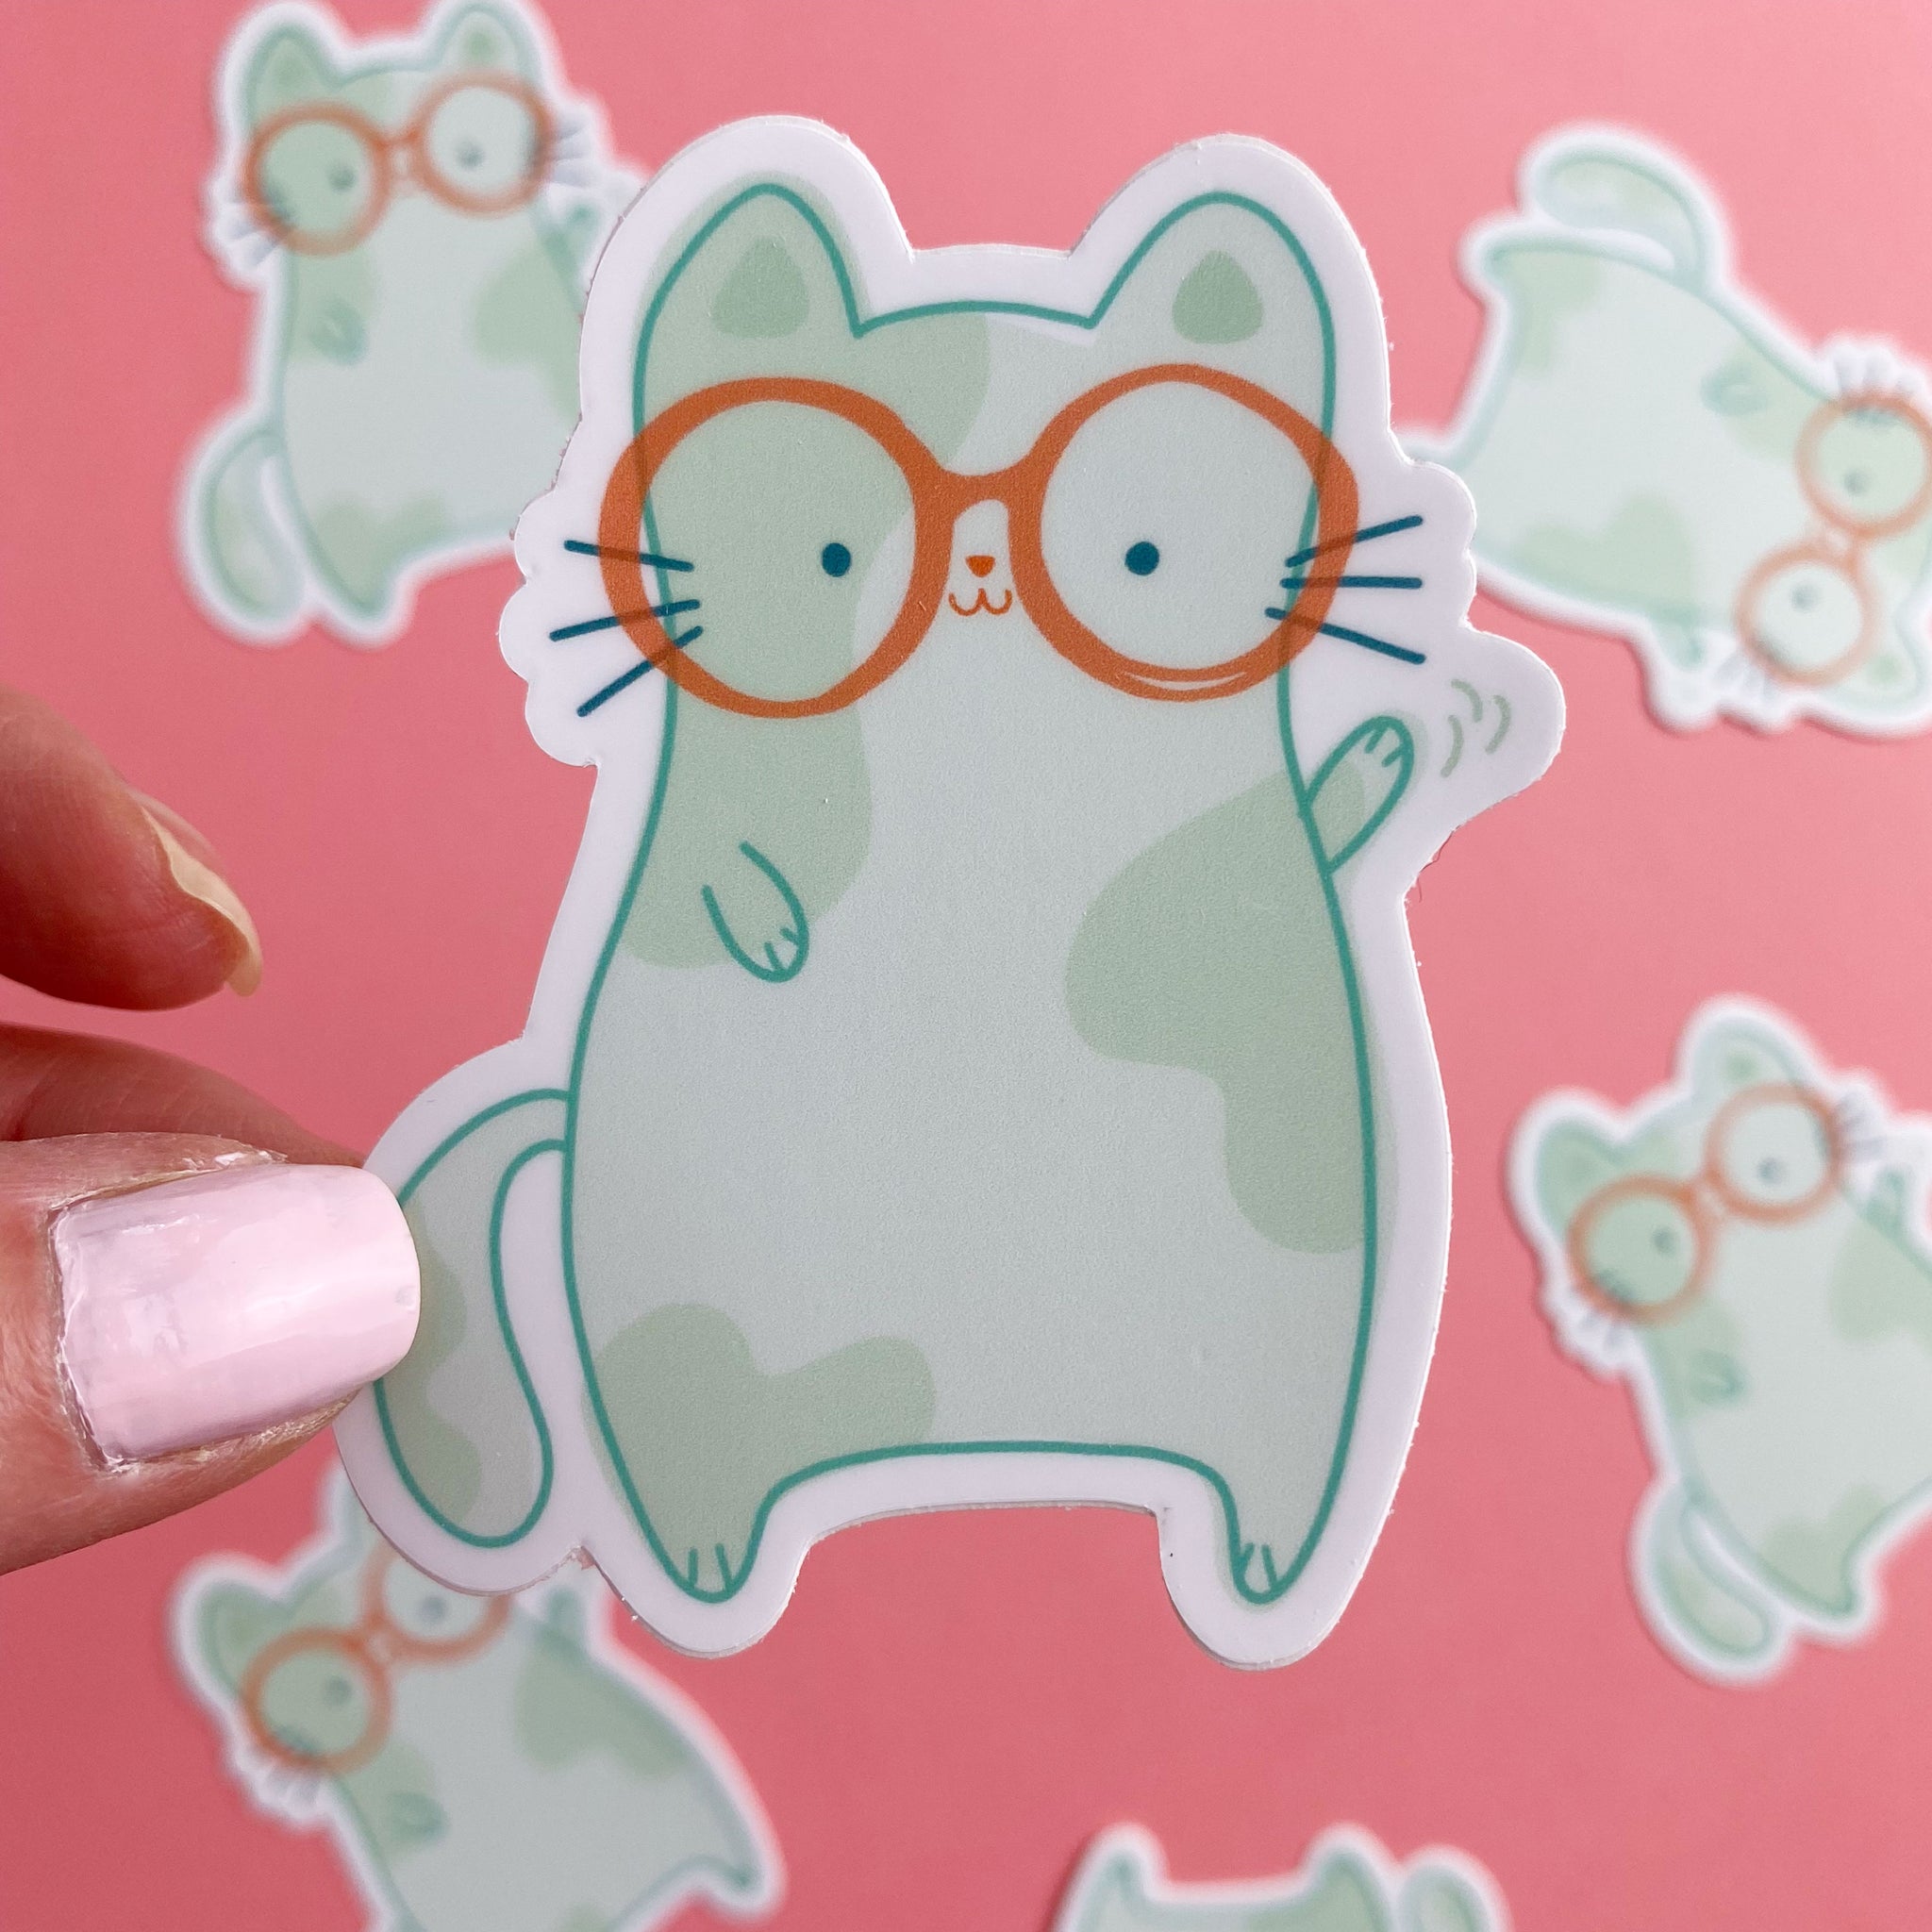 Dippity the Cat with Glasses Vinyl Sticker